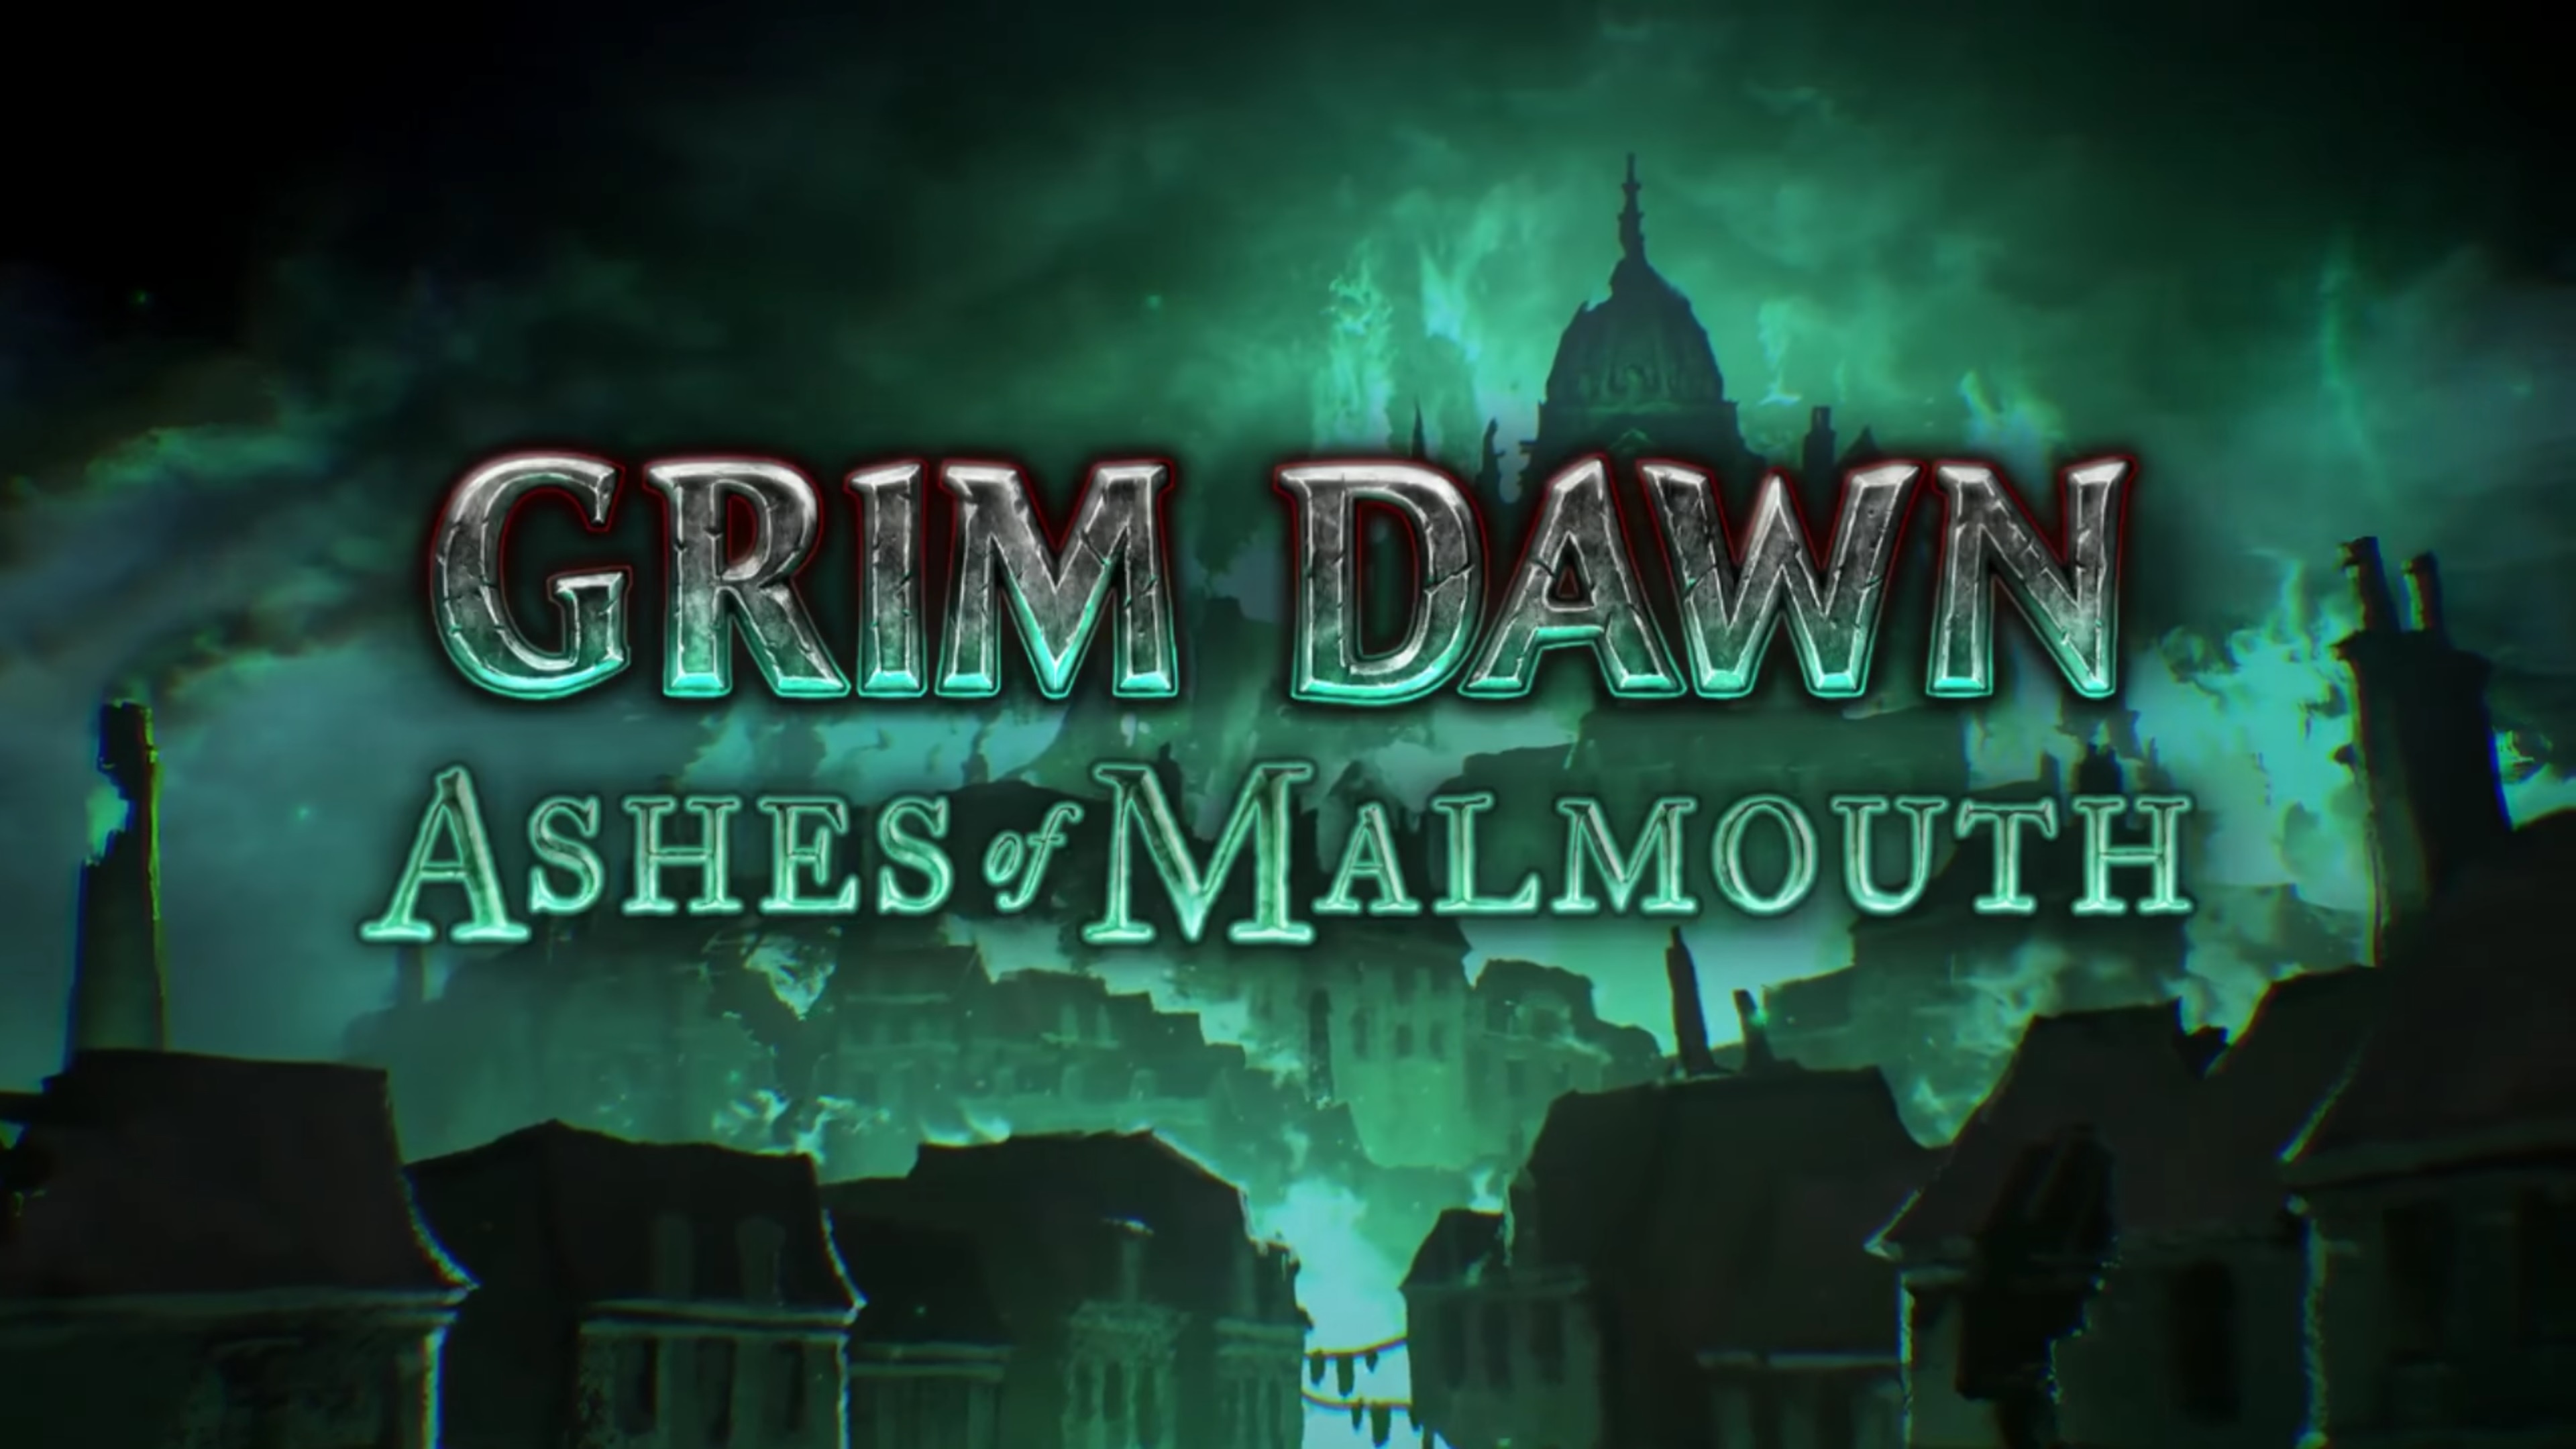 Grim Dawn: Ashes of Malmouth - the first downloadable content and expansion, DLC. 3840x2160 4K Wallpaper.